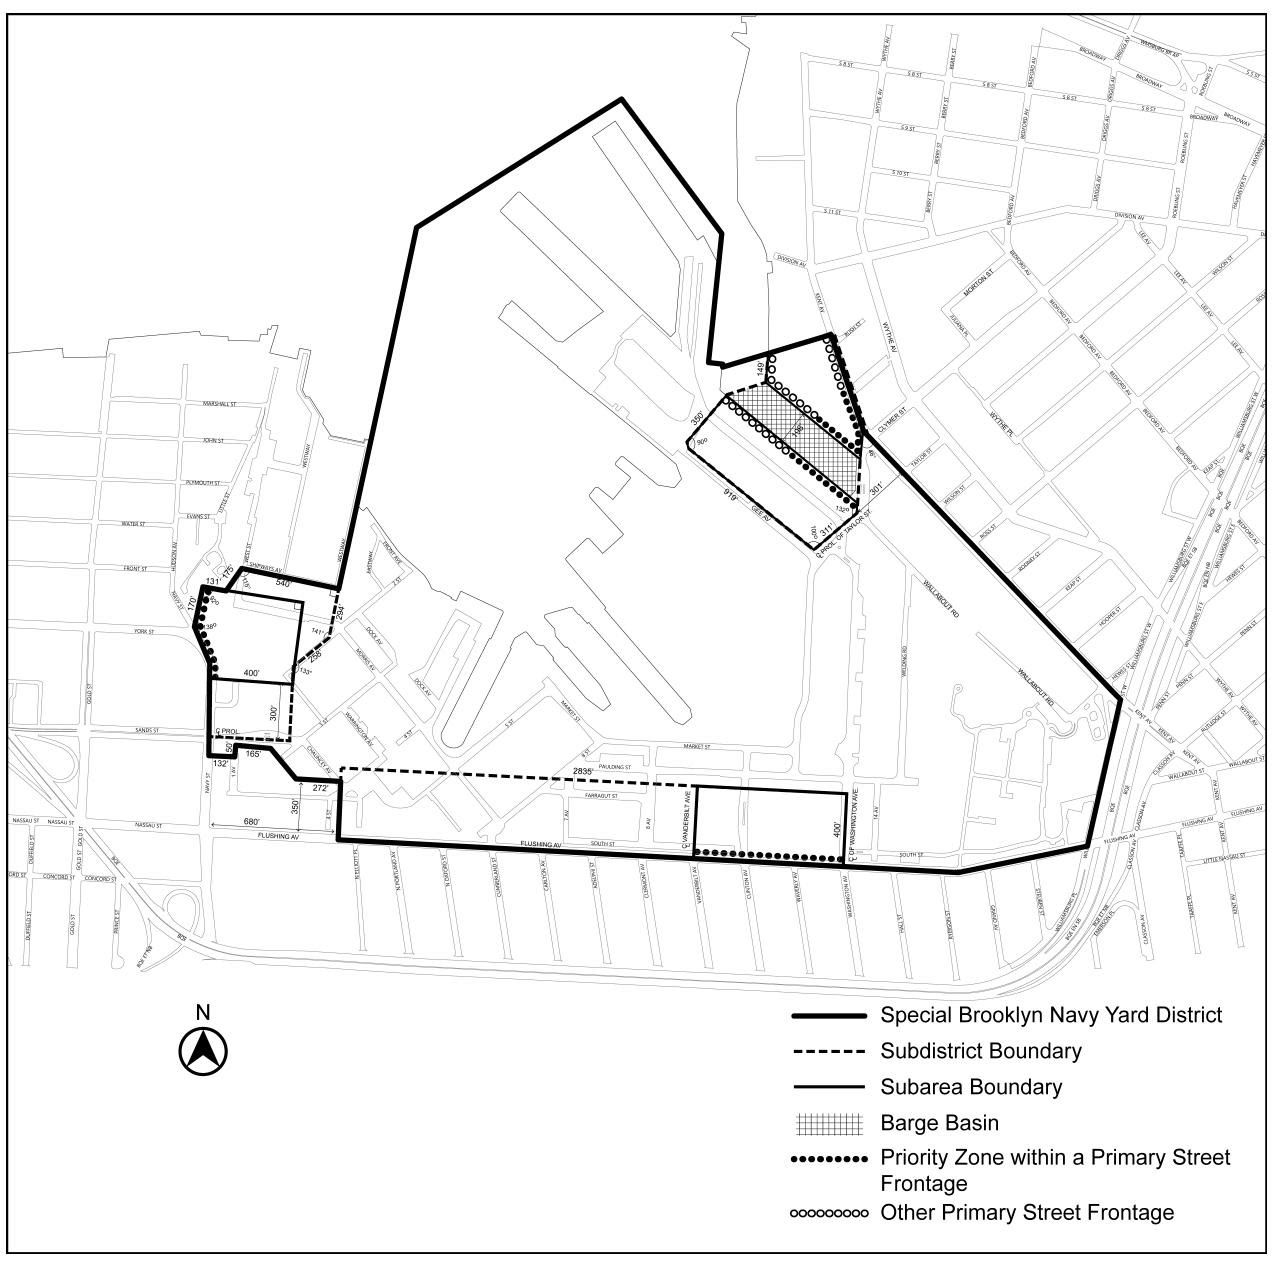 Zoning Resolutions Chapter 4: Special Brooklyn Navy Yard District APPENDIX A.5